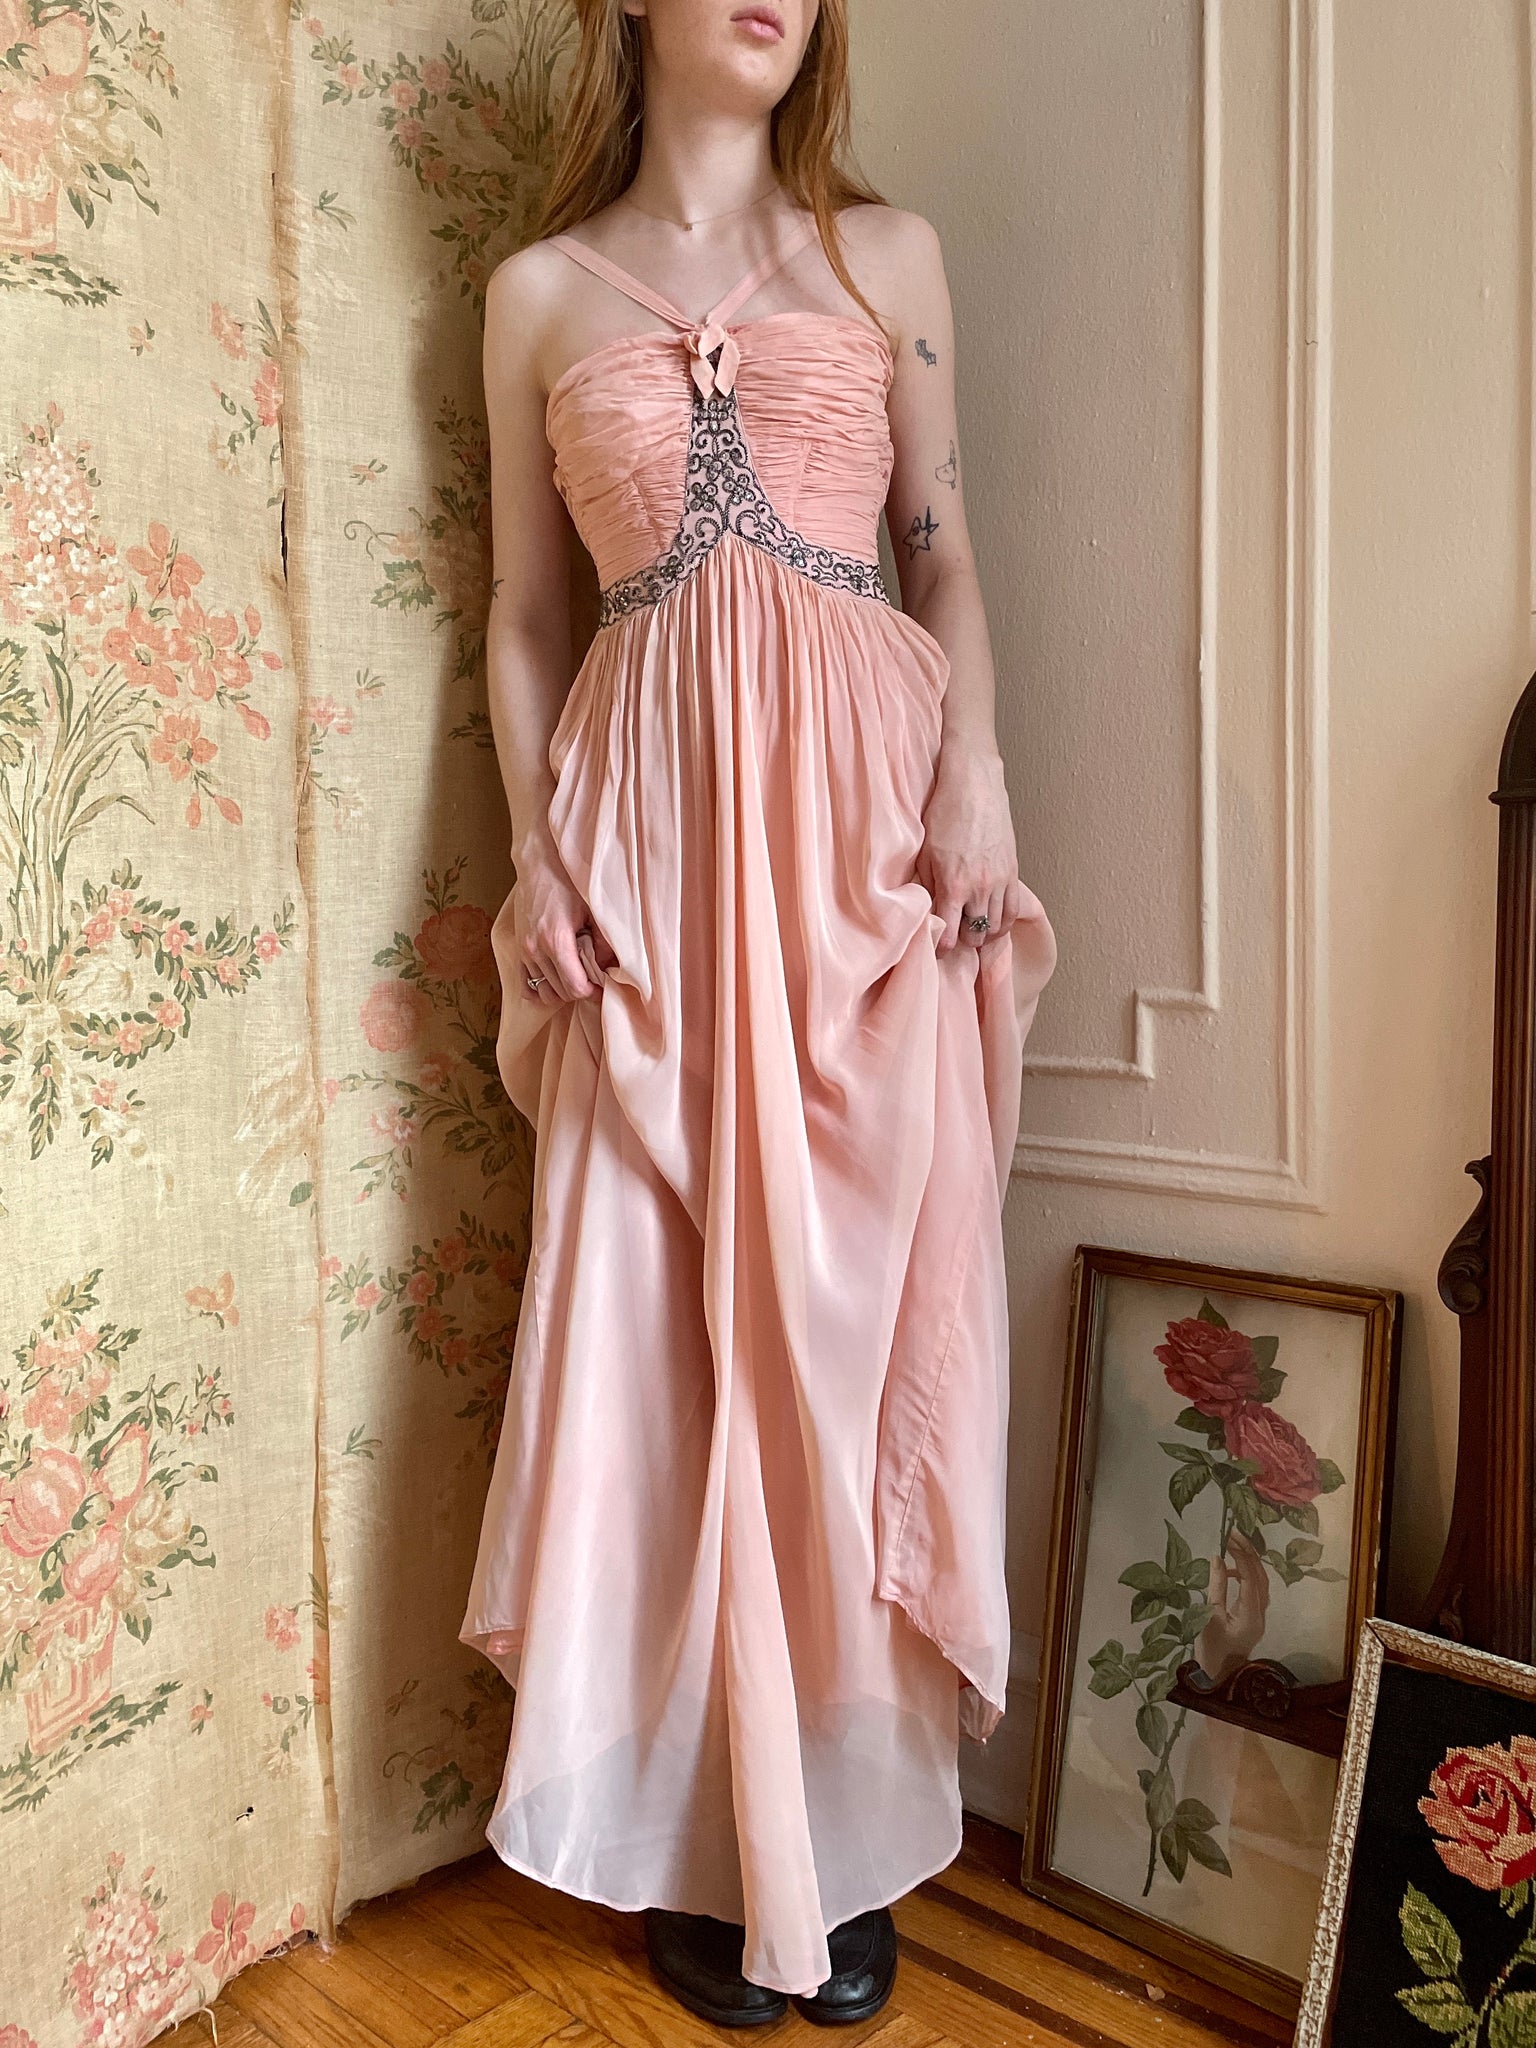 Vintage 1940's Light Pink Liquid Satin Gown, Dress With Gathered Bodice,  Size Large -  Hong Kong